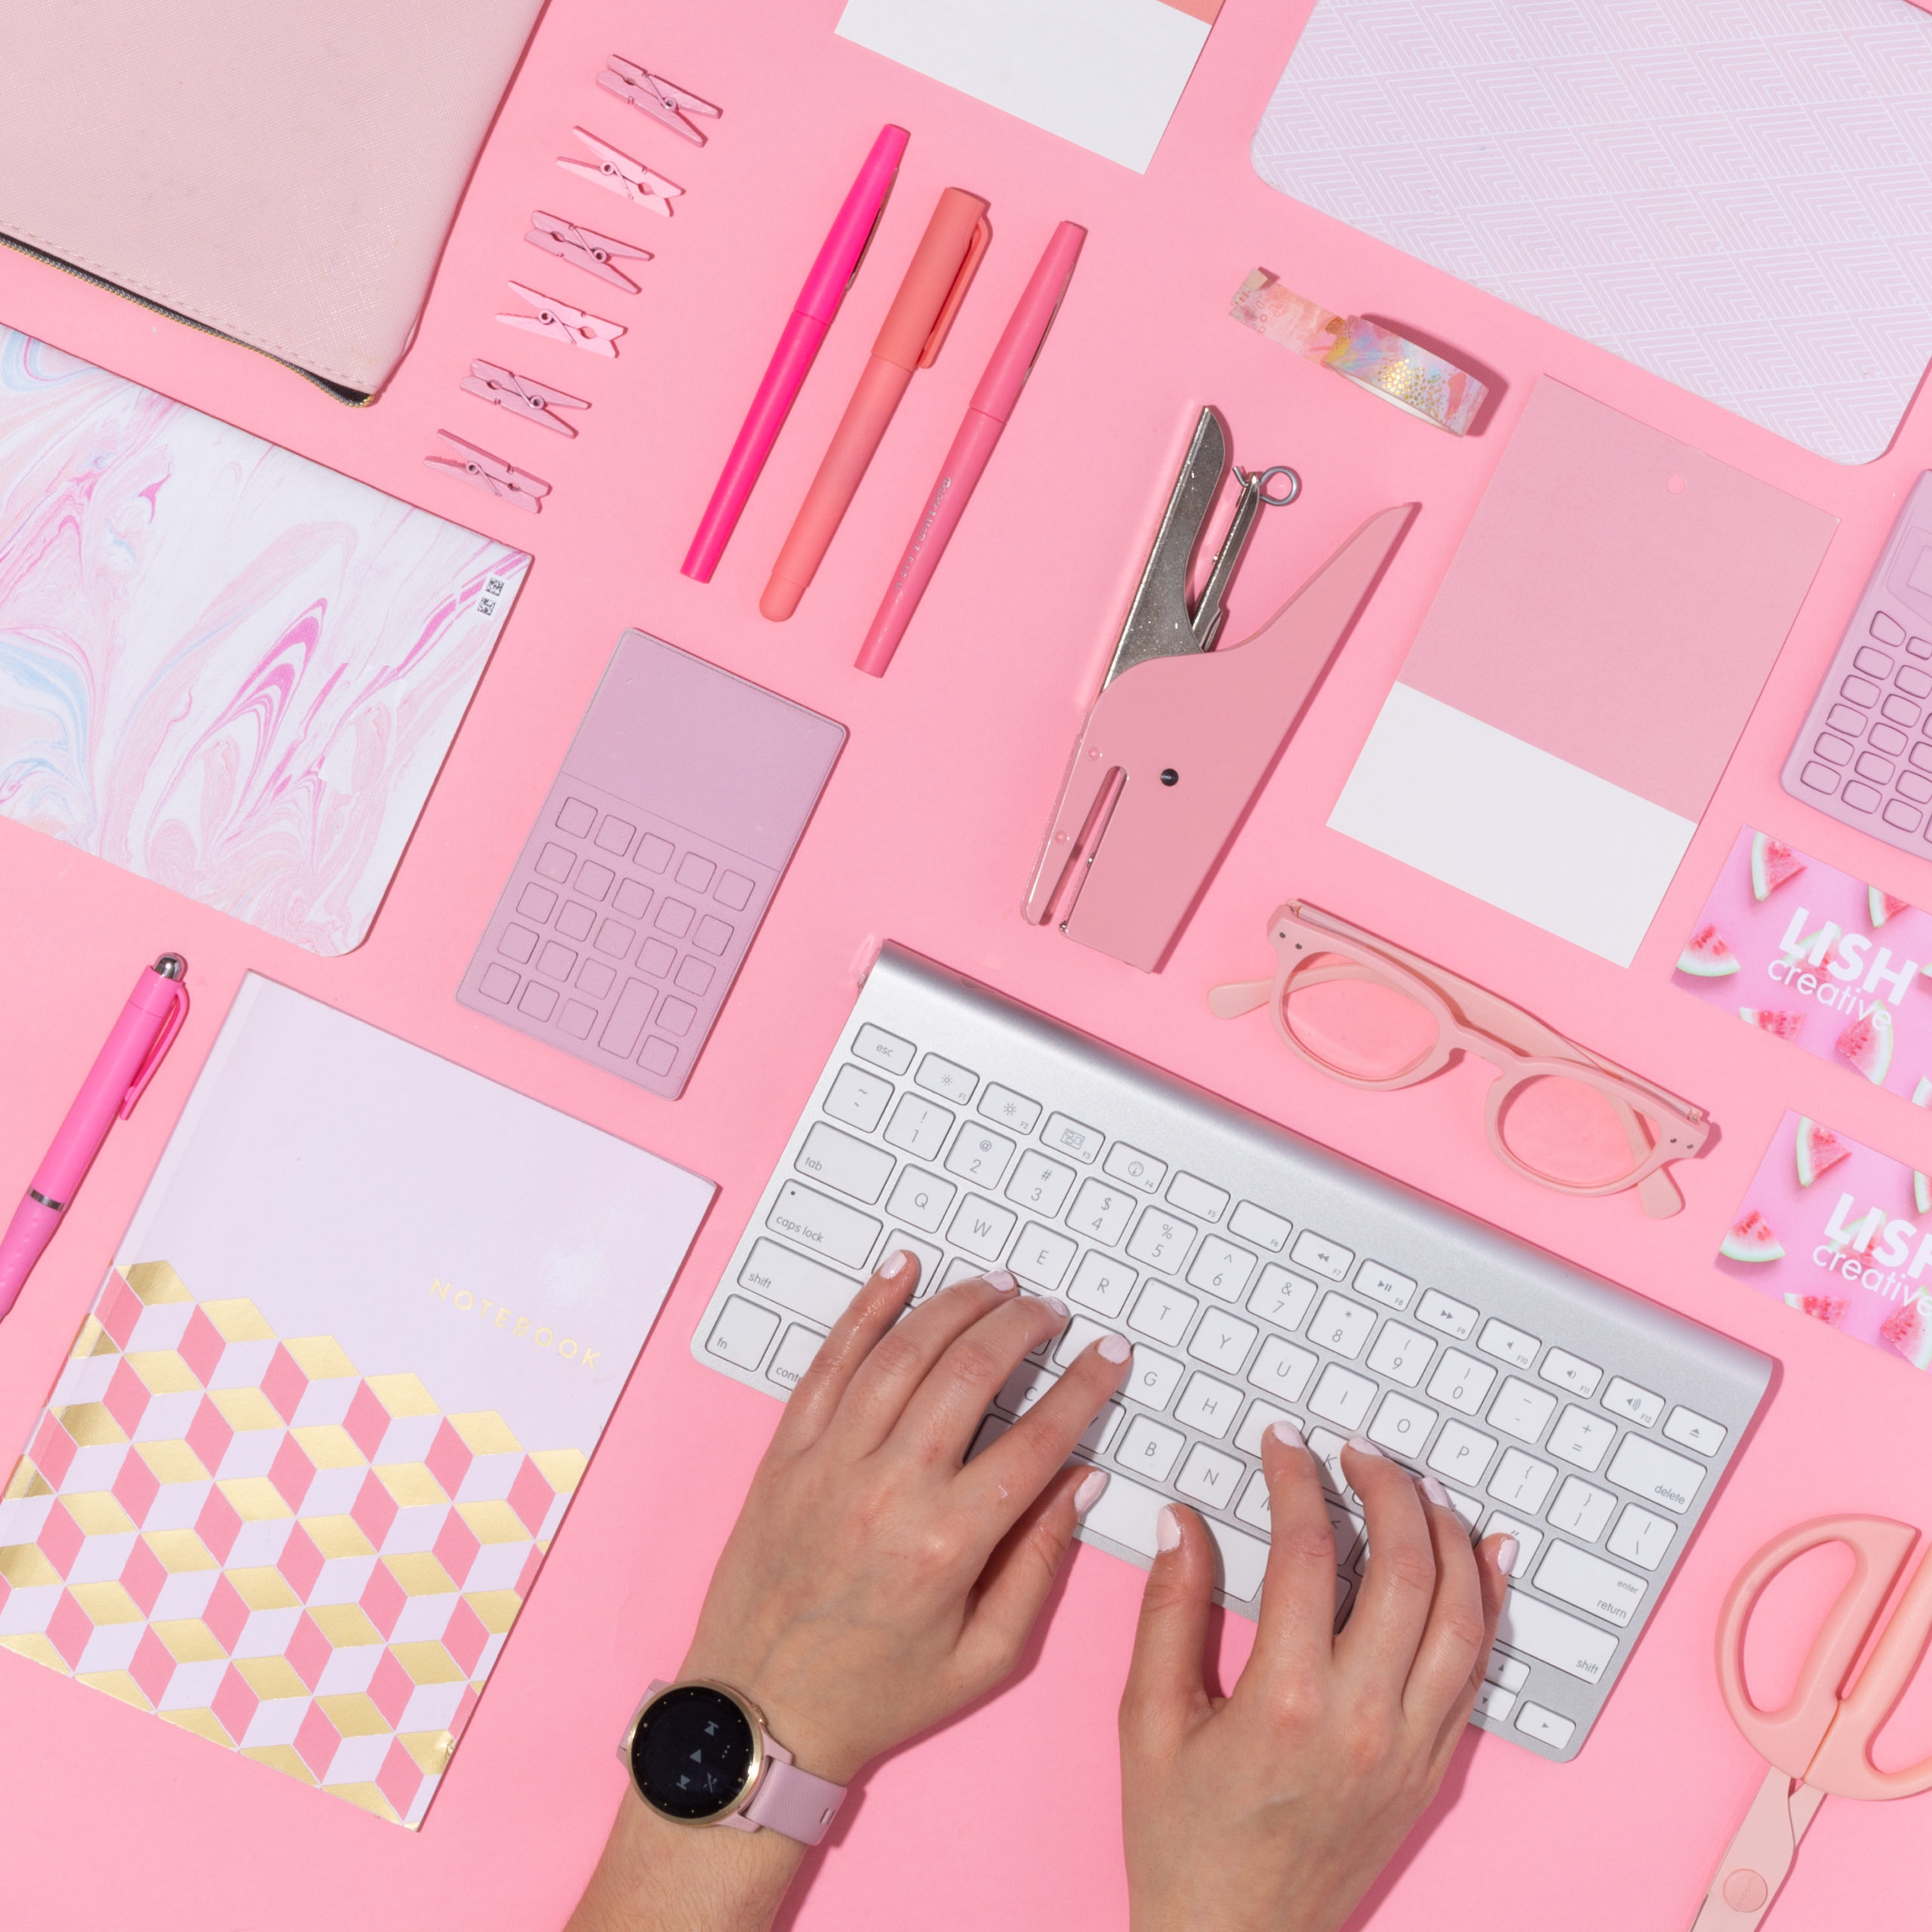 neat spread of pink office supplies